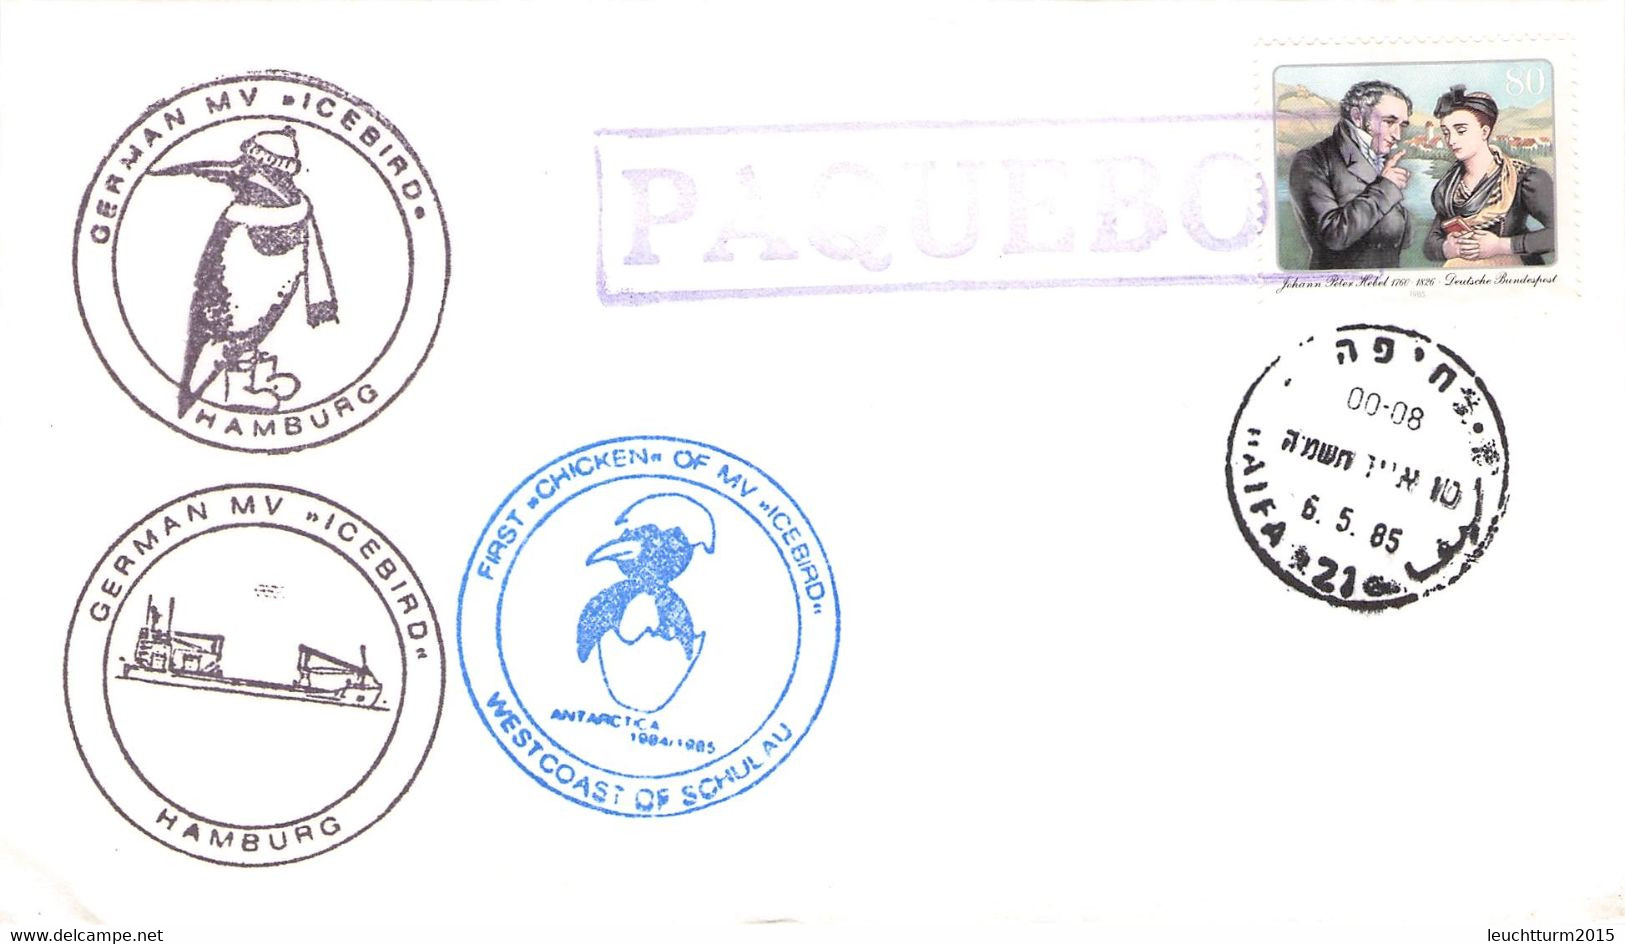 ARCTIS/ANTARCTIC - SMALL COLLECTION COVERS, FDC / QG104